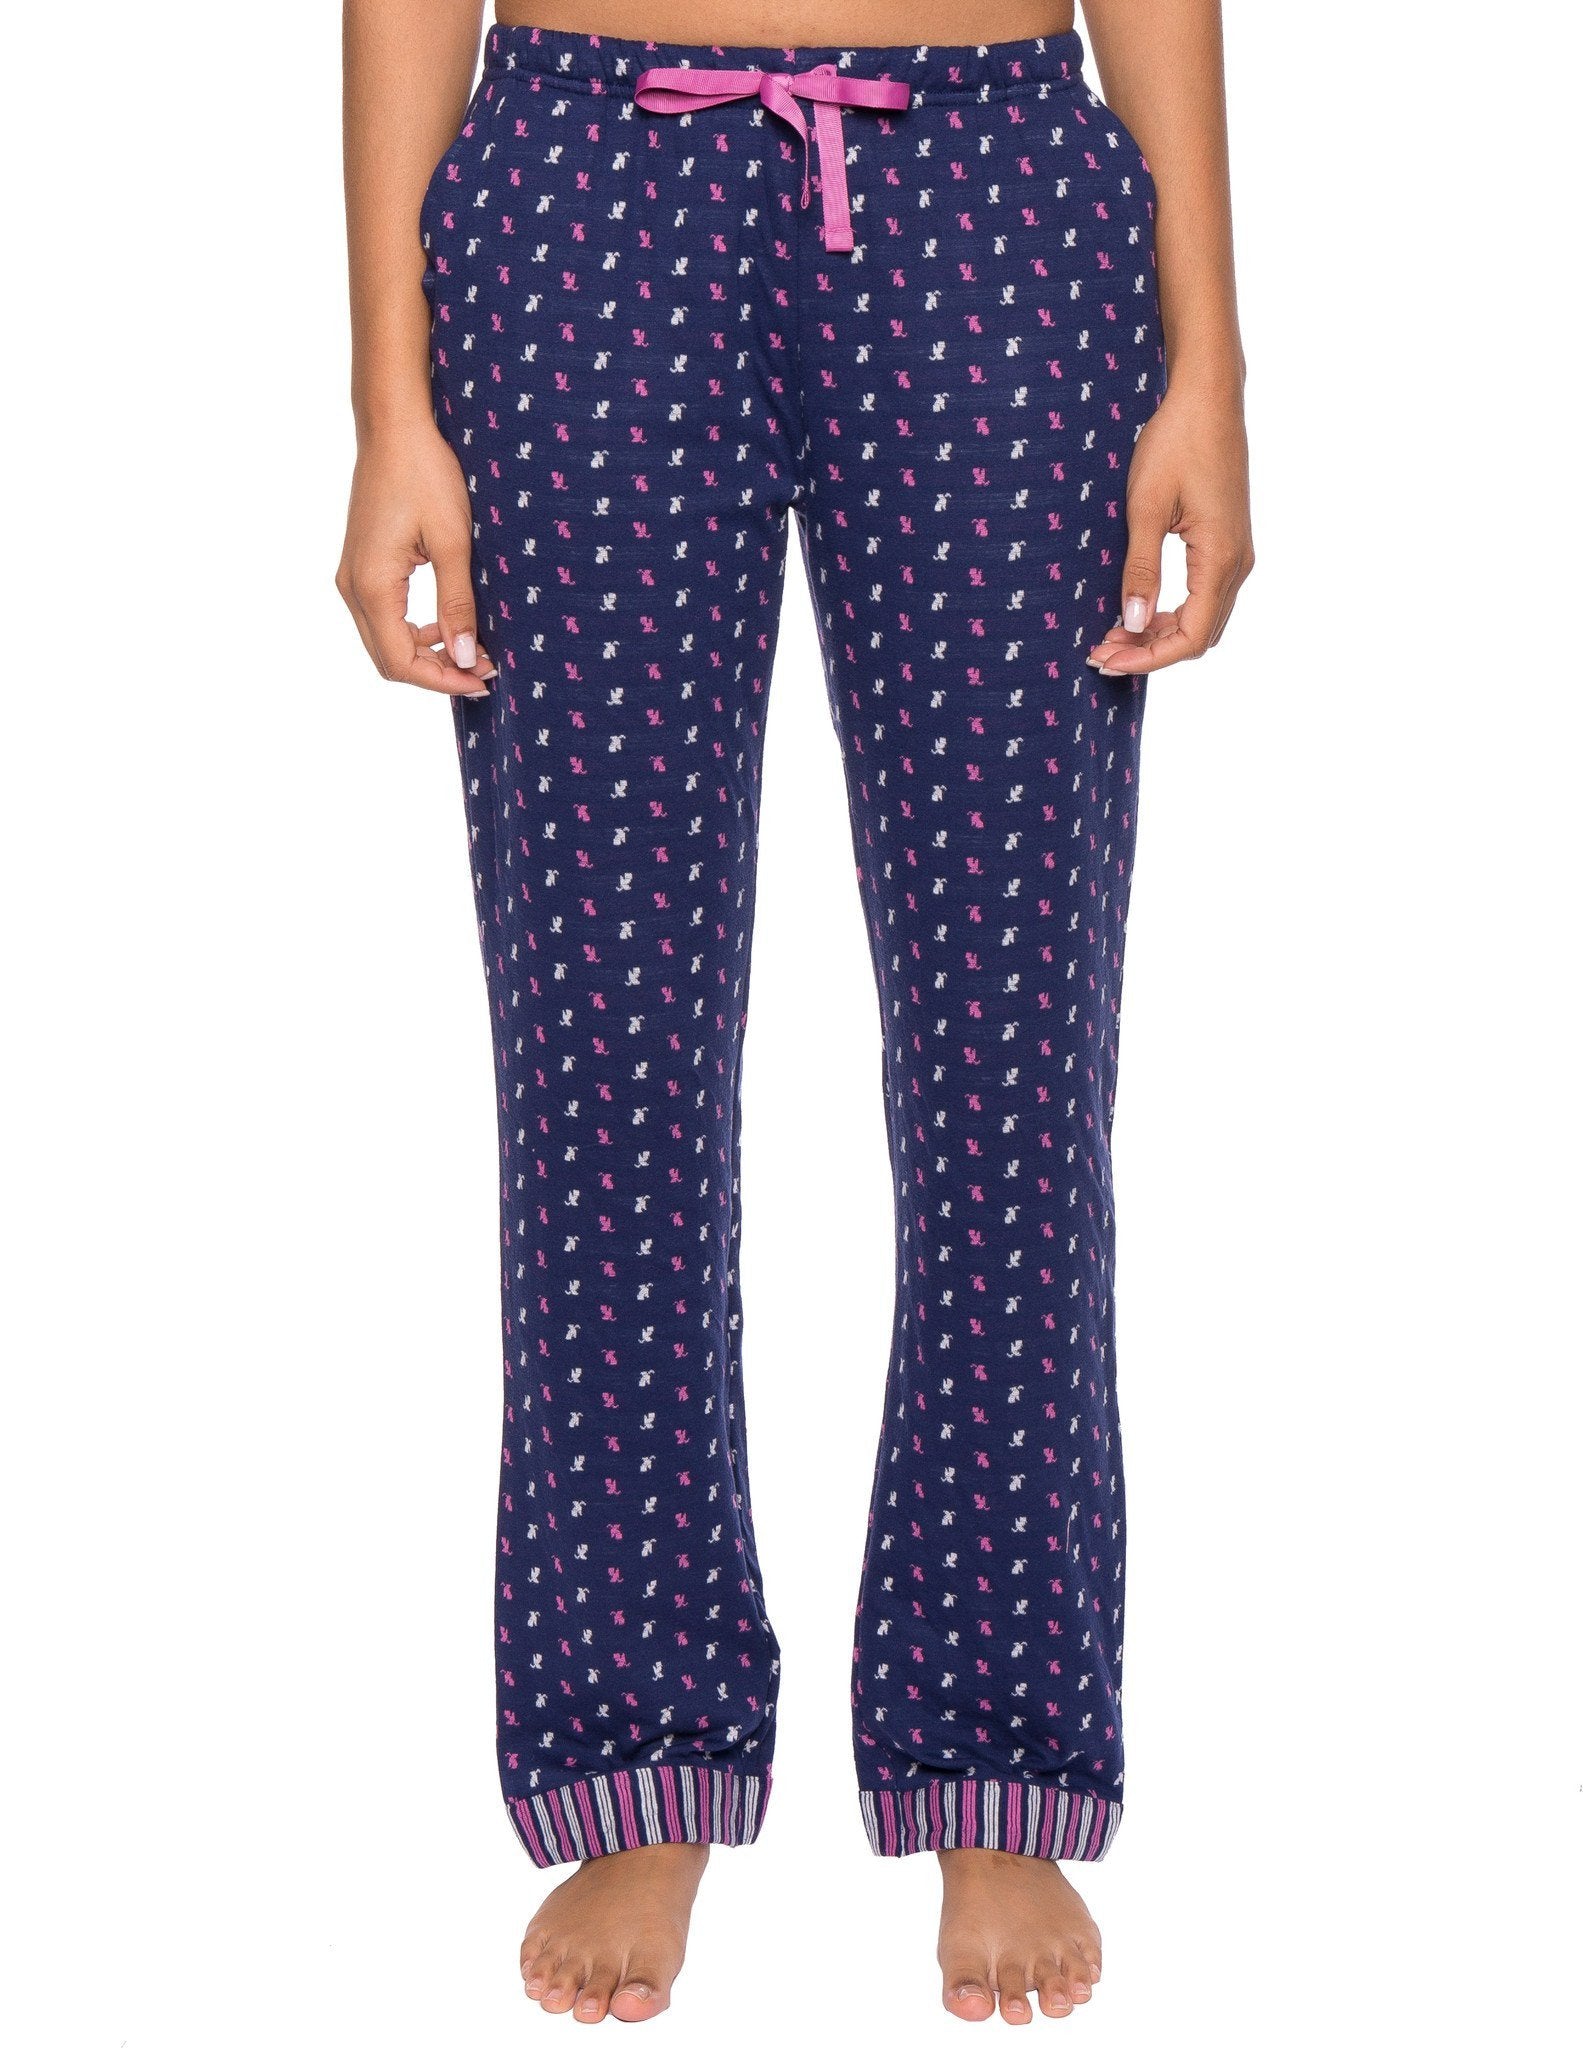 Women's Double Layer Knit Jersey Lounge Pants - Leaves - Navy